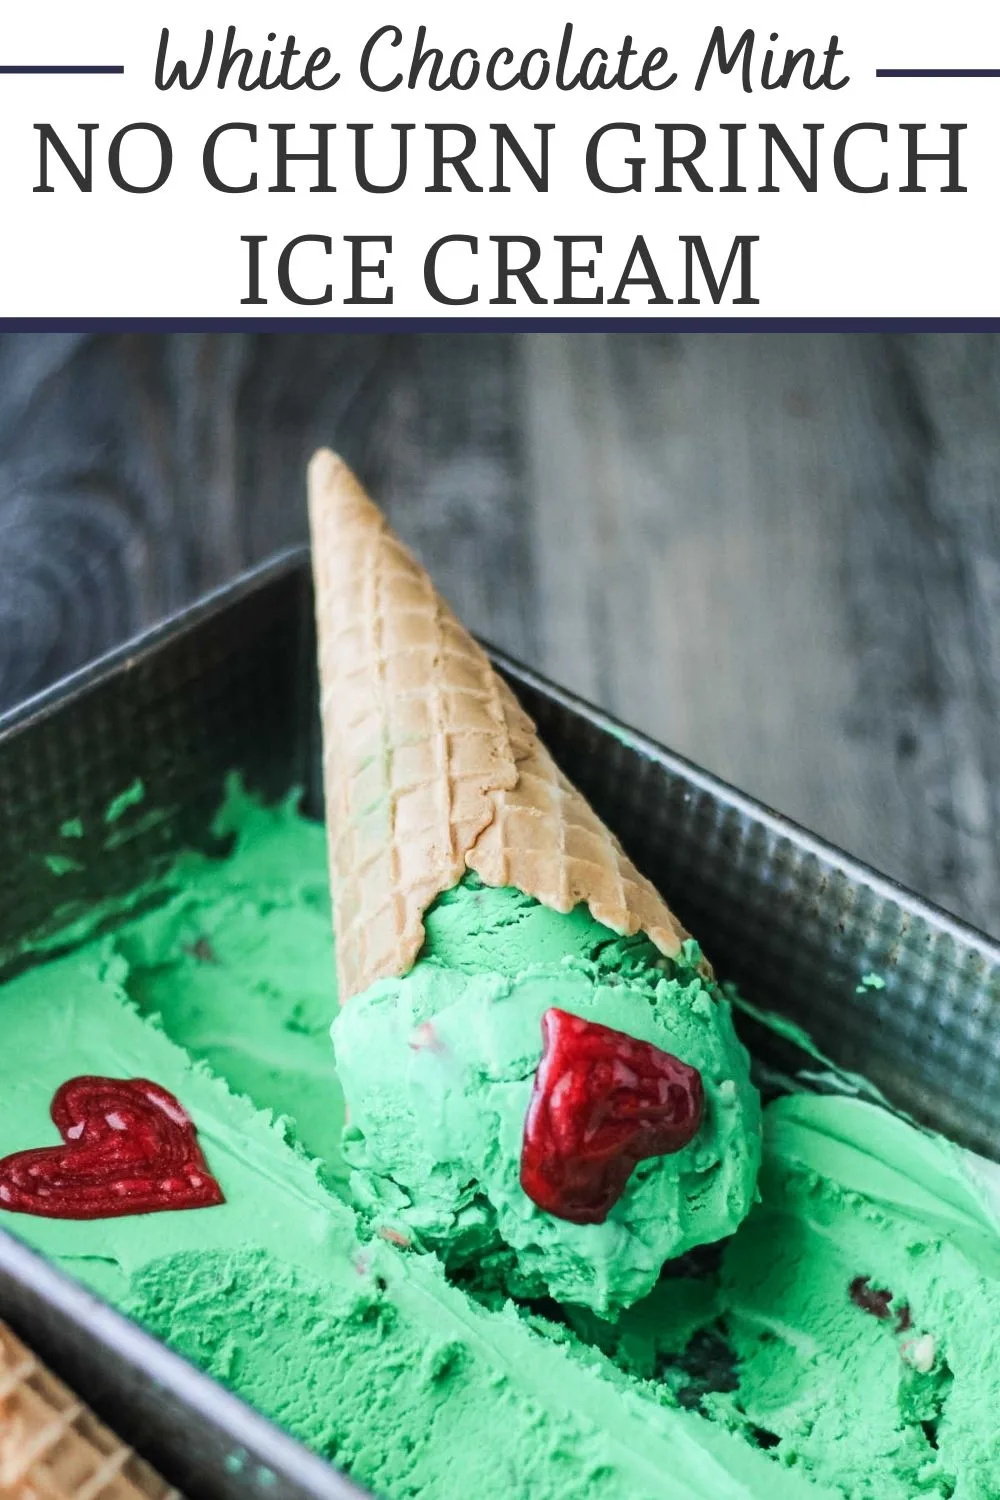 Grinch no churn white chocolate mint ice cream is easy to make and beyond fun to serve. It is a perfect treat for Christmas, a Dr. Seuss party or just because.